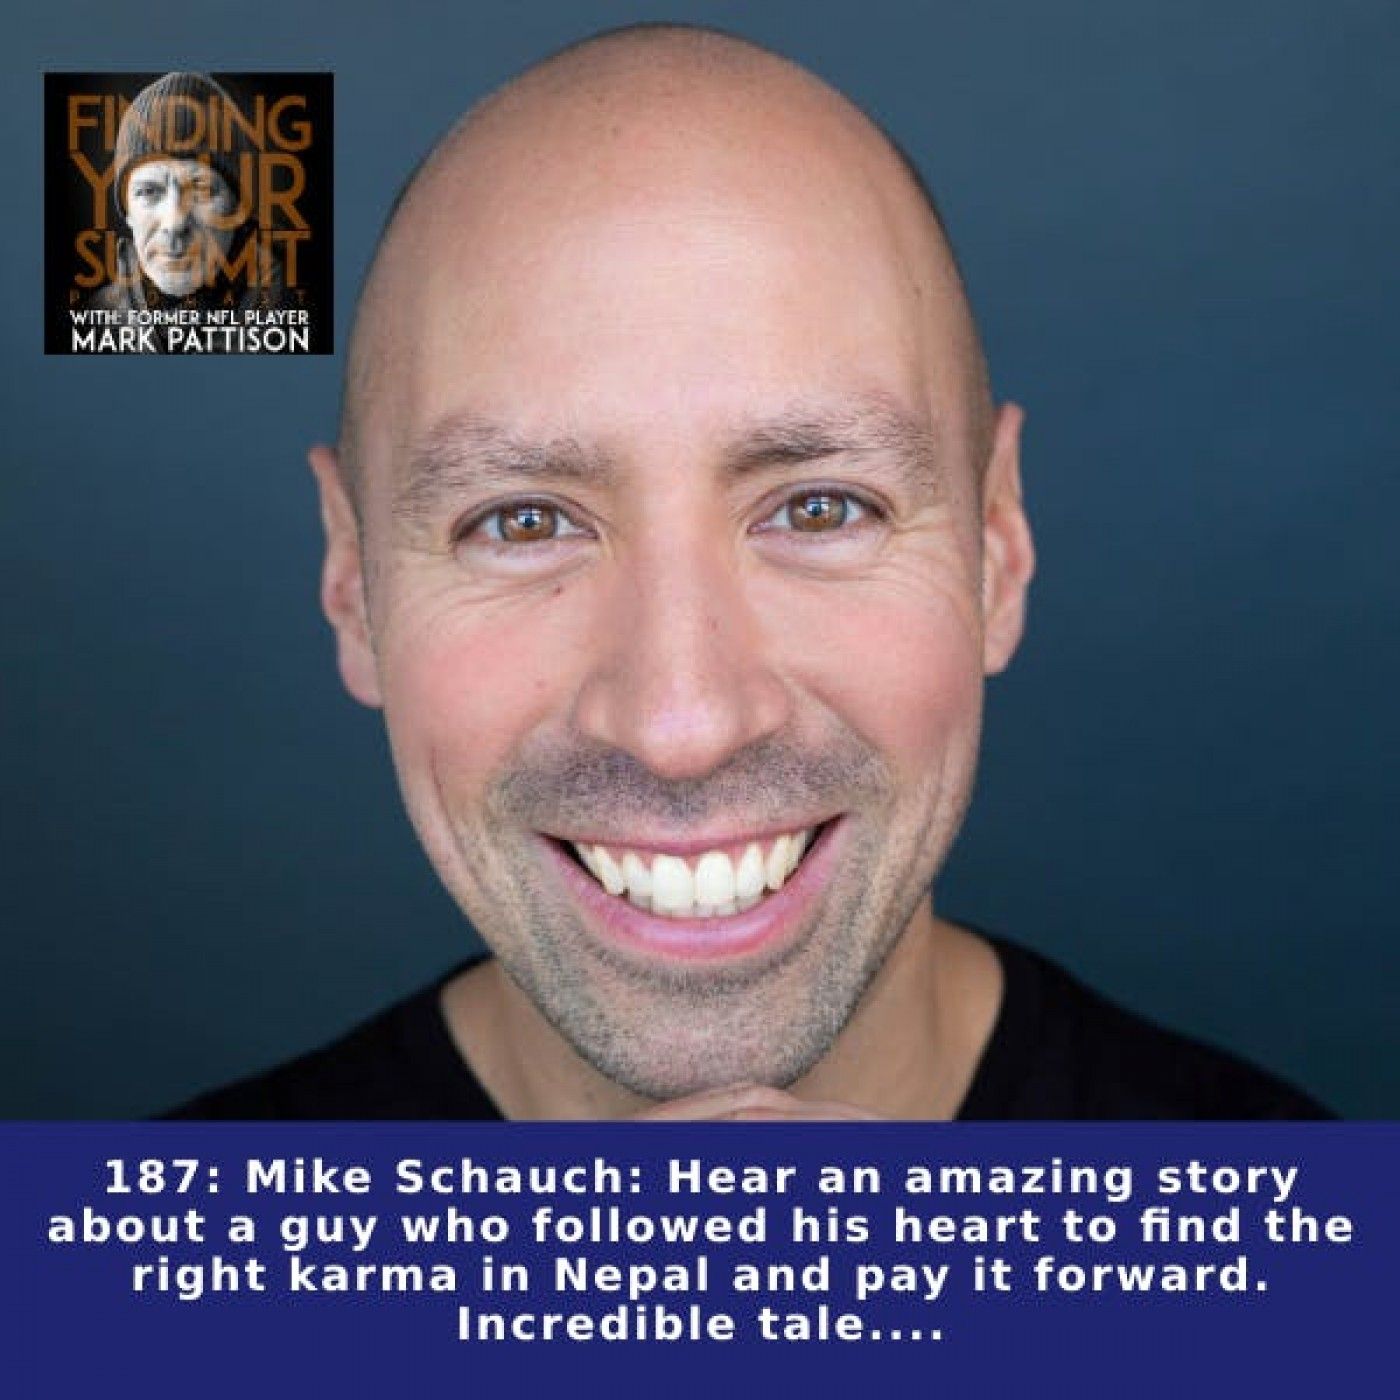 Mike Schauch: Hear an amazing story about a guy who followed his heart to find the right karma in Nepal and pay it forward. Incredible tale.